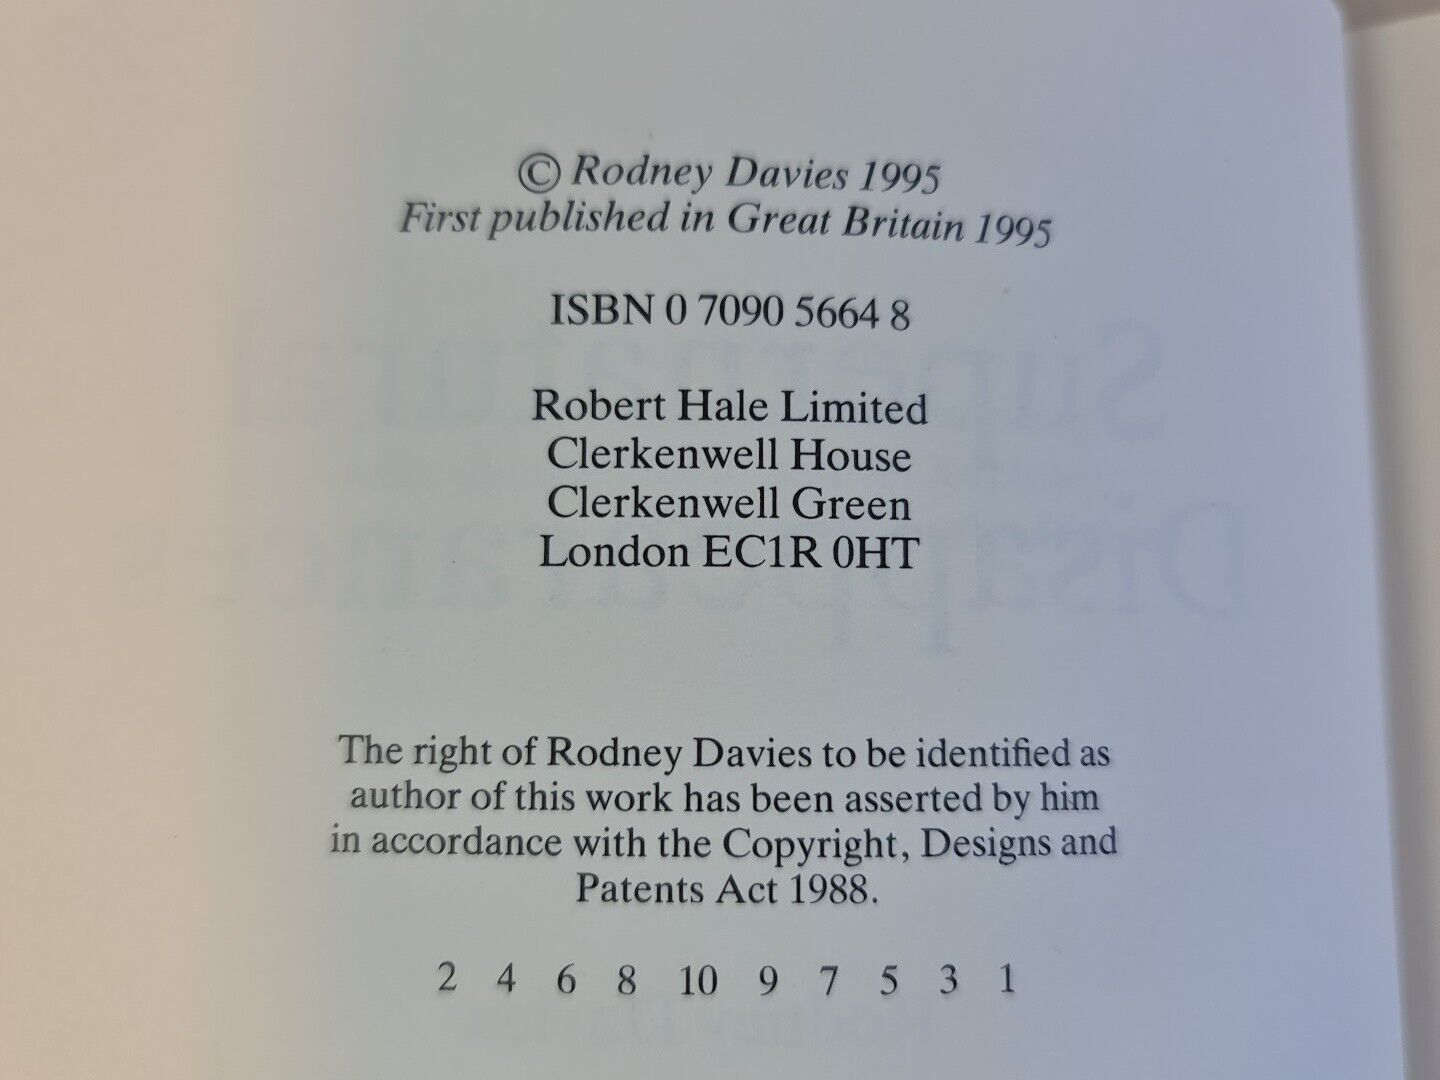 Supernatural Disappearances by Rodney Davies (1995)